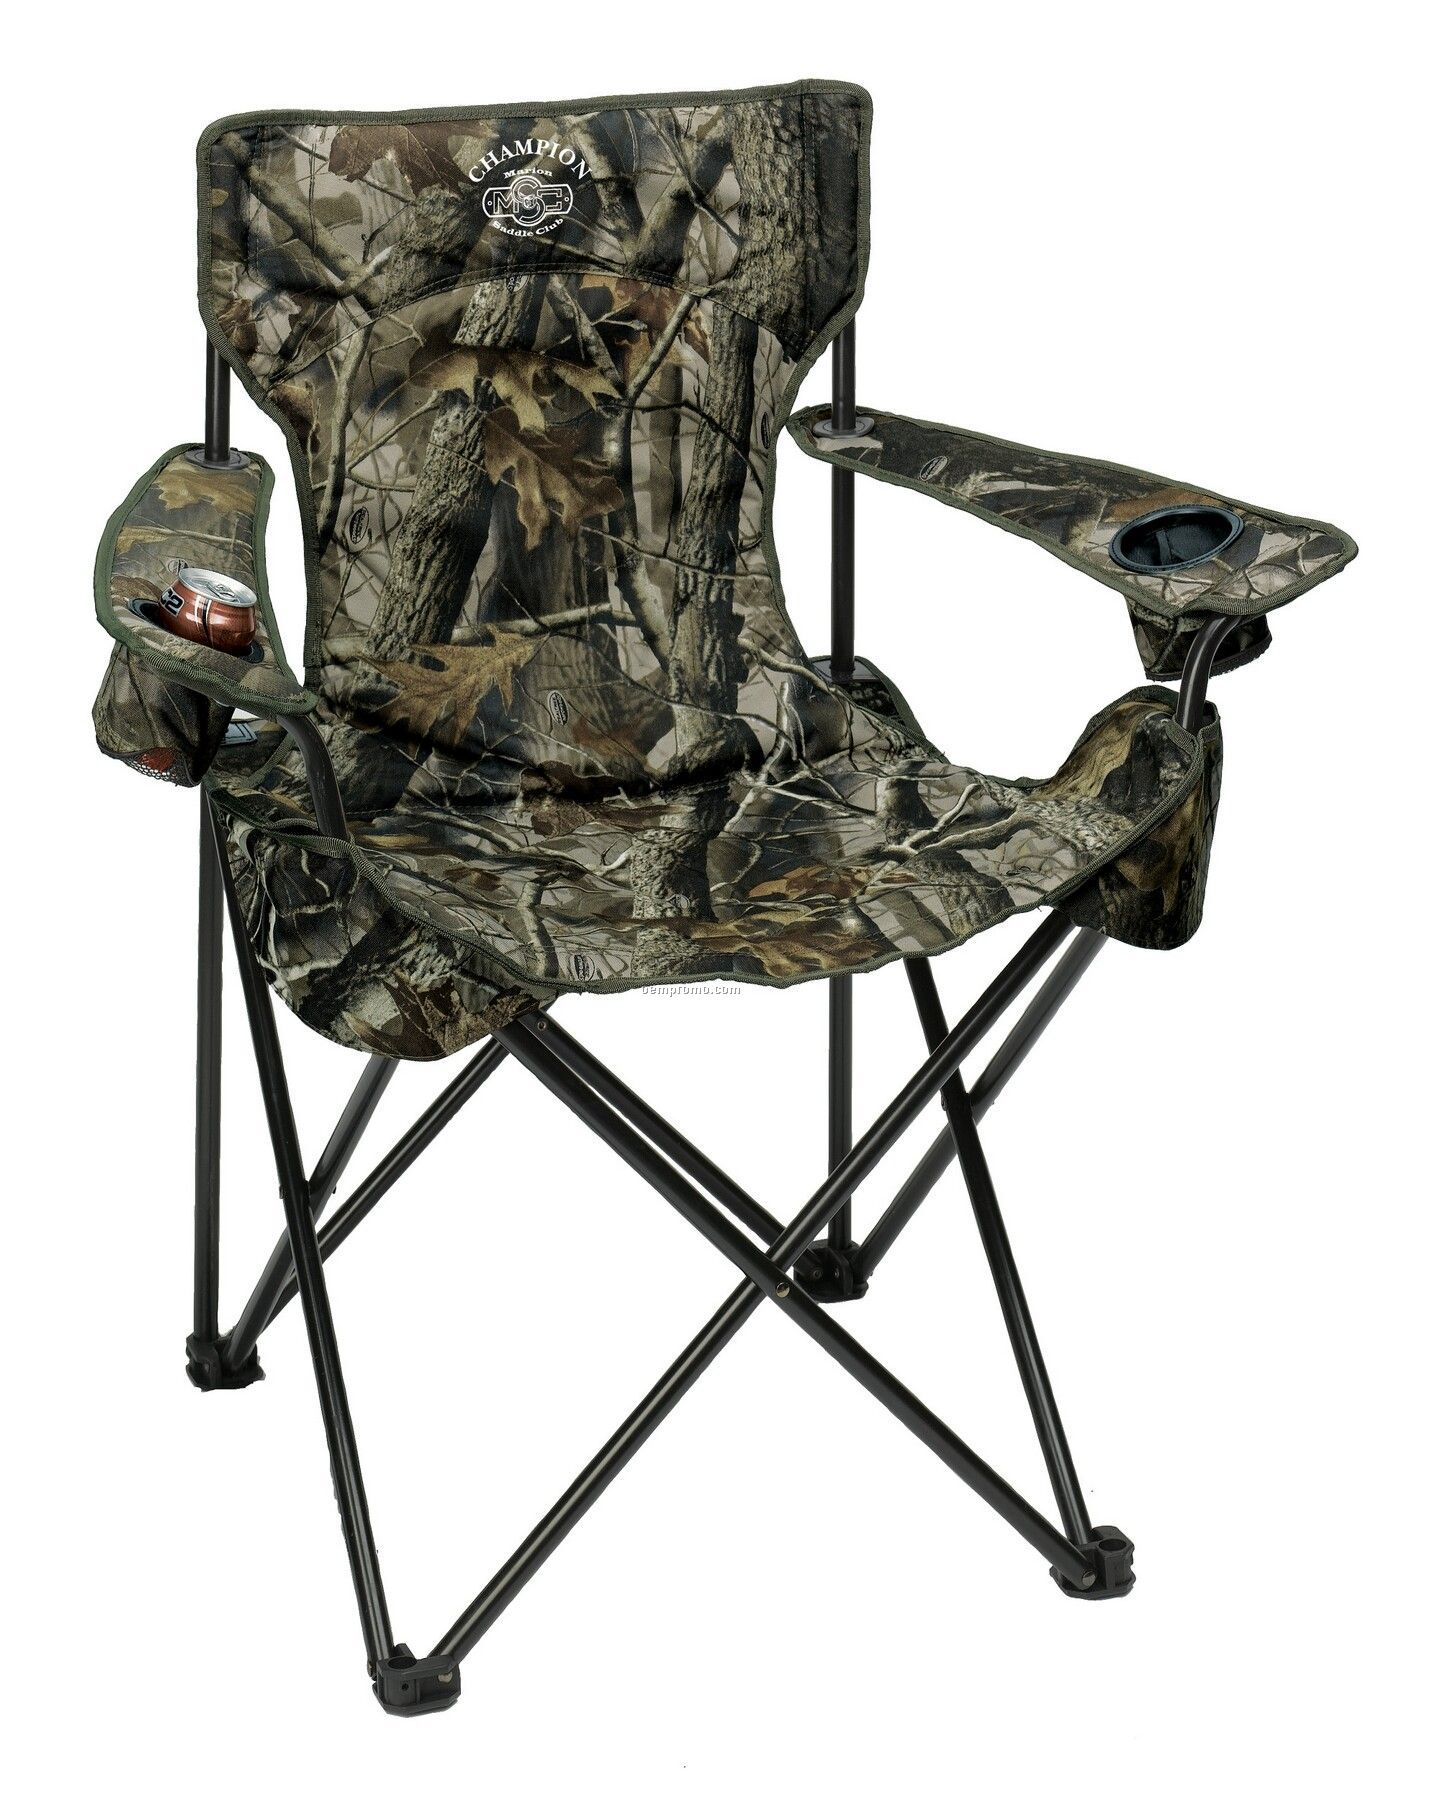 The Camouflage "Big 'un" Folding Camp Chair W/ Carry Bag